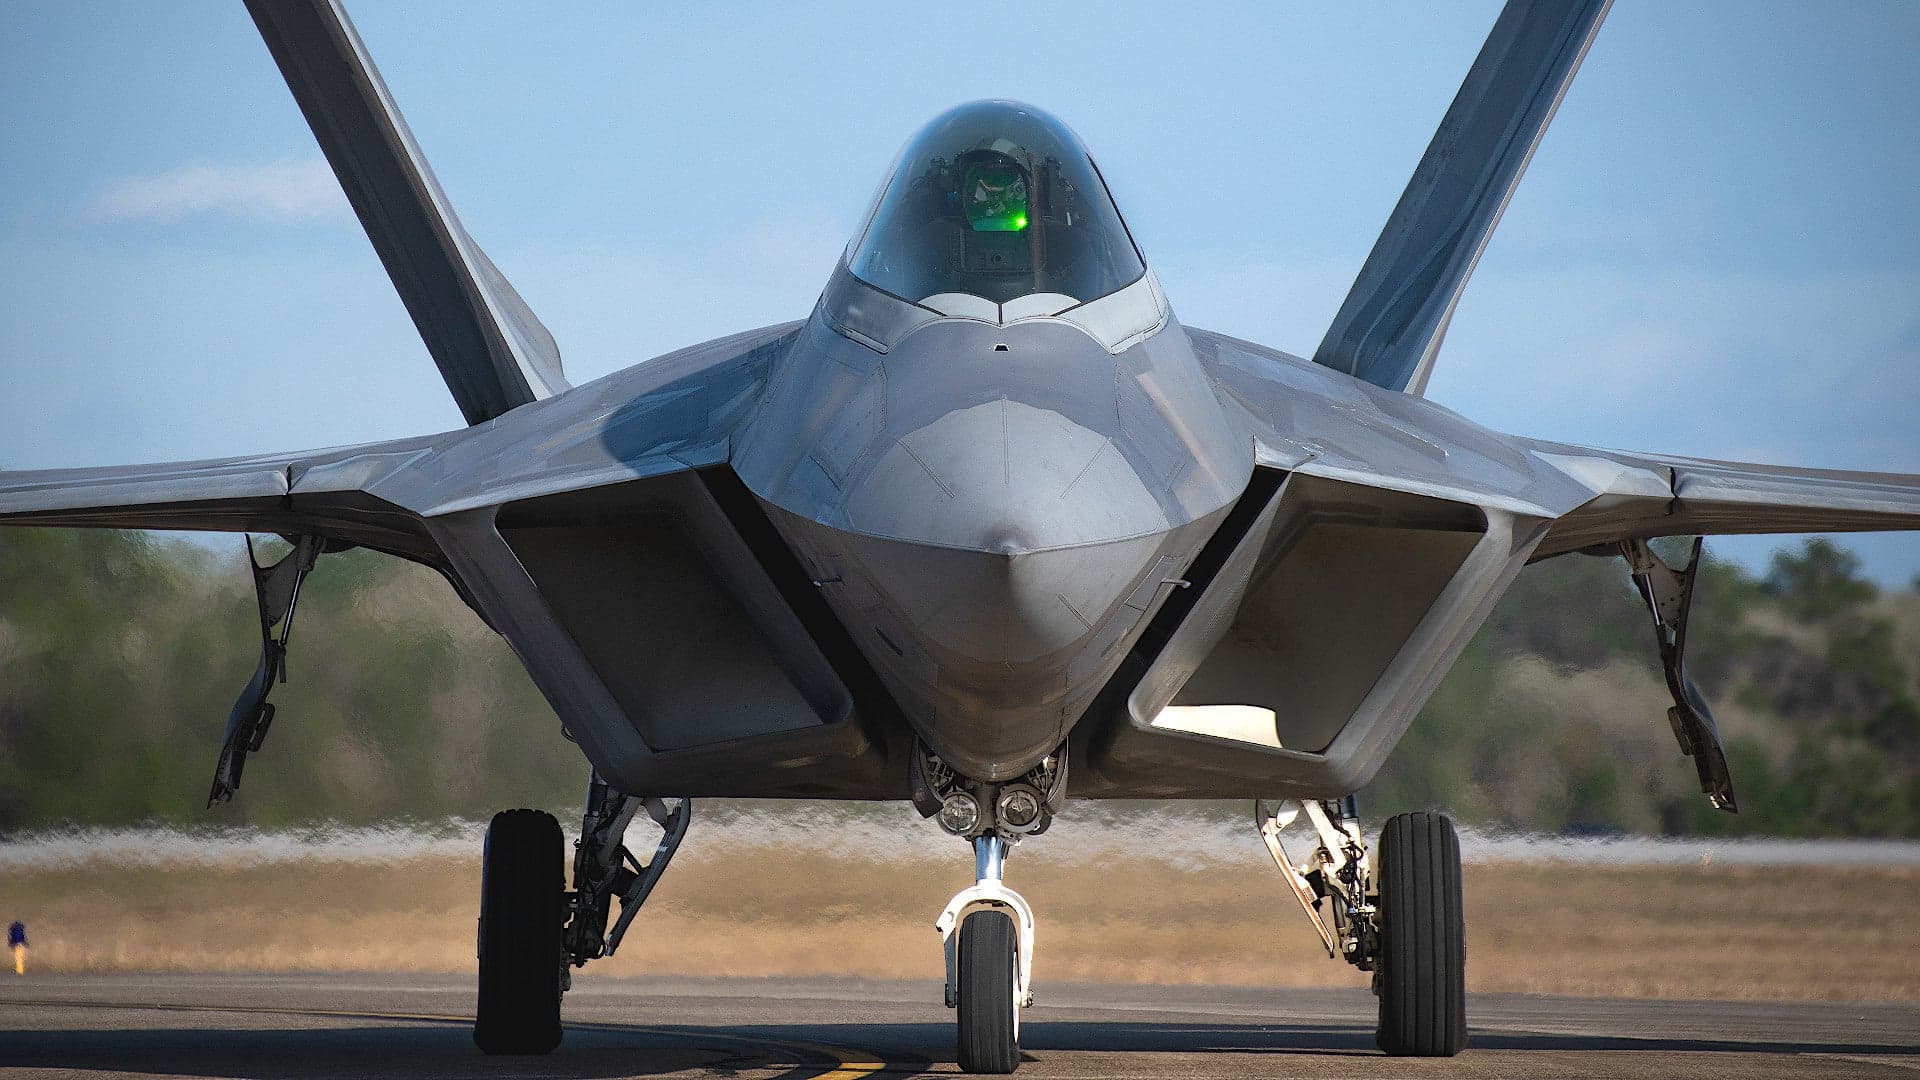 F-22 Stealth Fighter Ends Up Nose Down On The Runway At Eglin Air Force Base In Florida